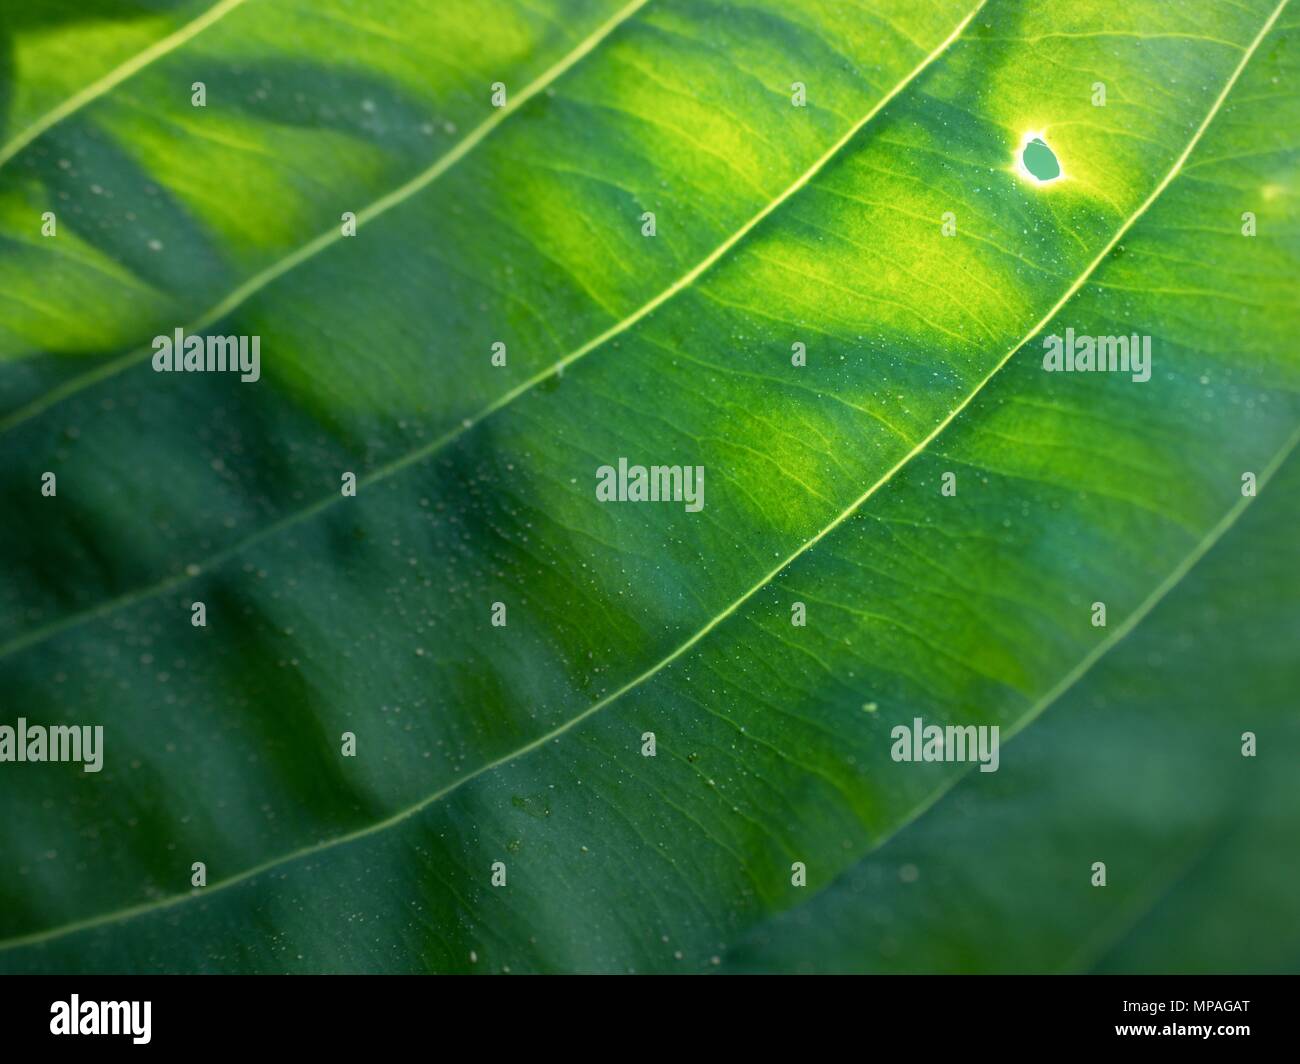 Leaf contour of the hostа plan, lush foliage. Dark green colored leaves of a plant. The hosta in the garden Stock Photo